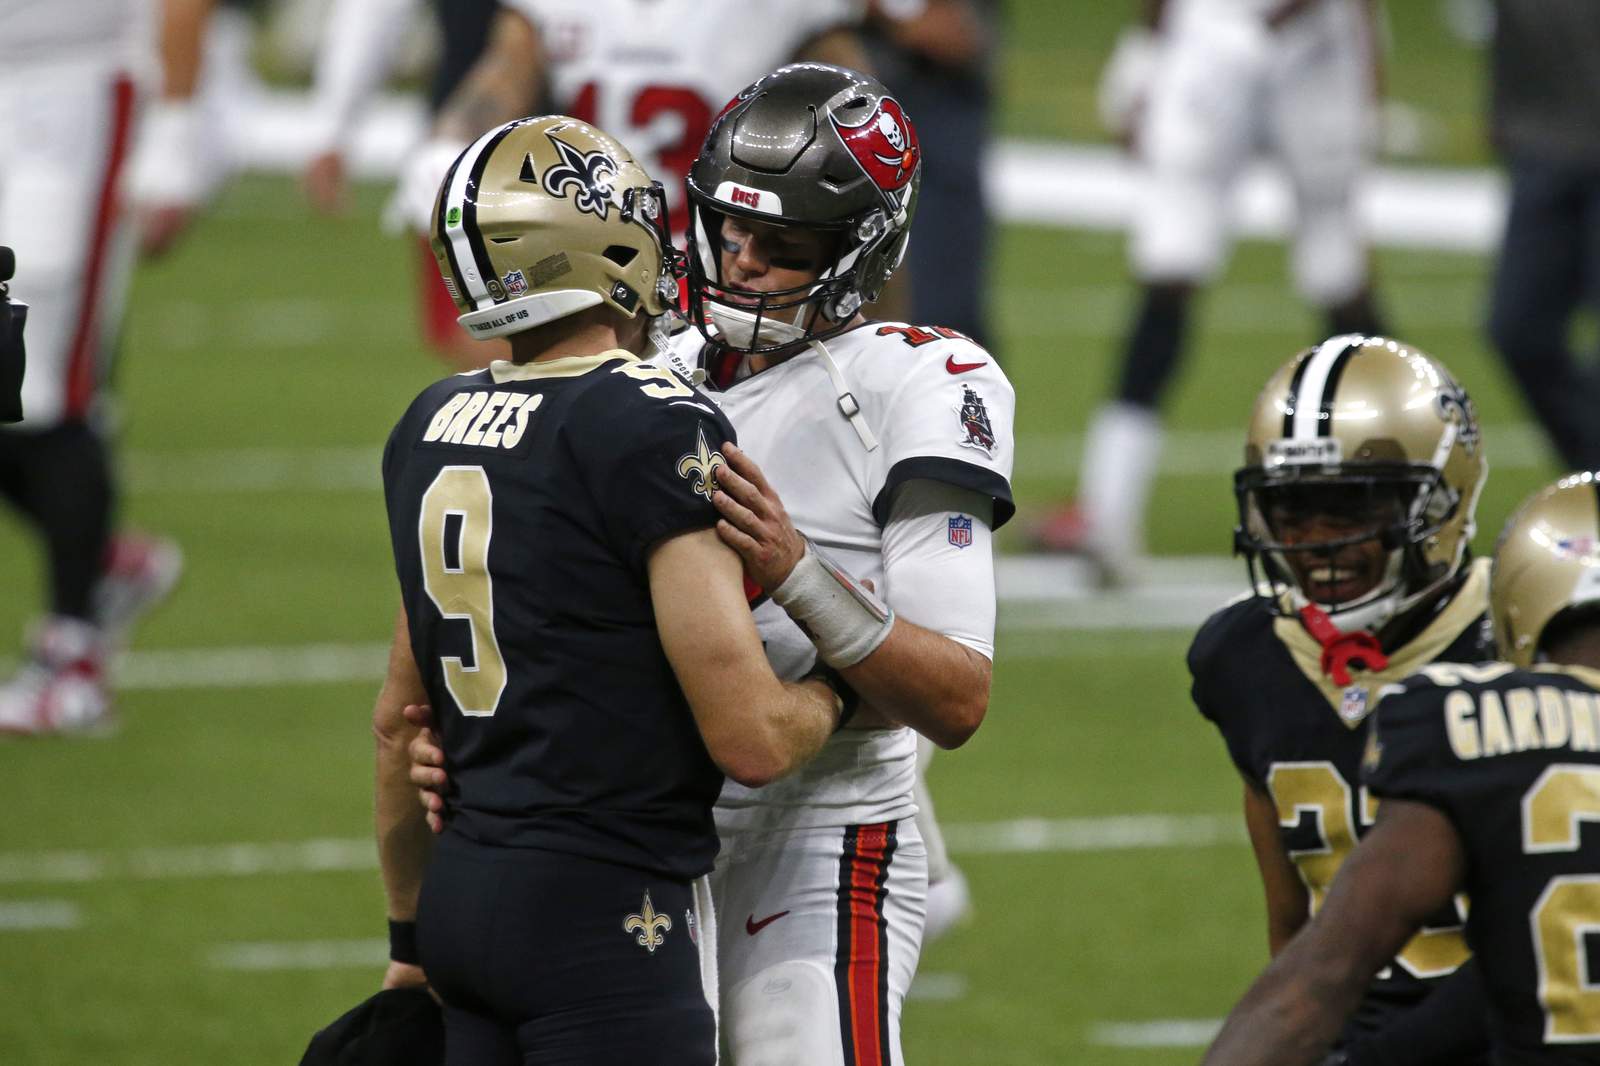 Saints’ Brees exits playoffs, perhaps career, on sour note